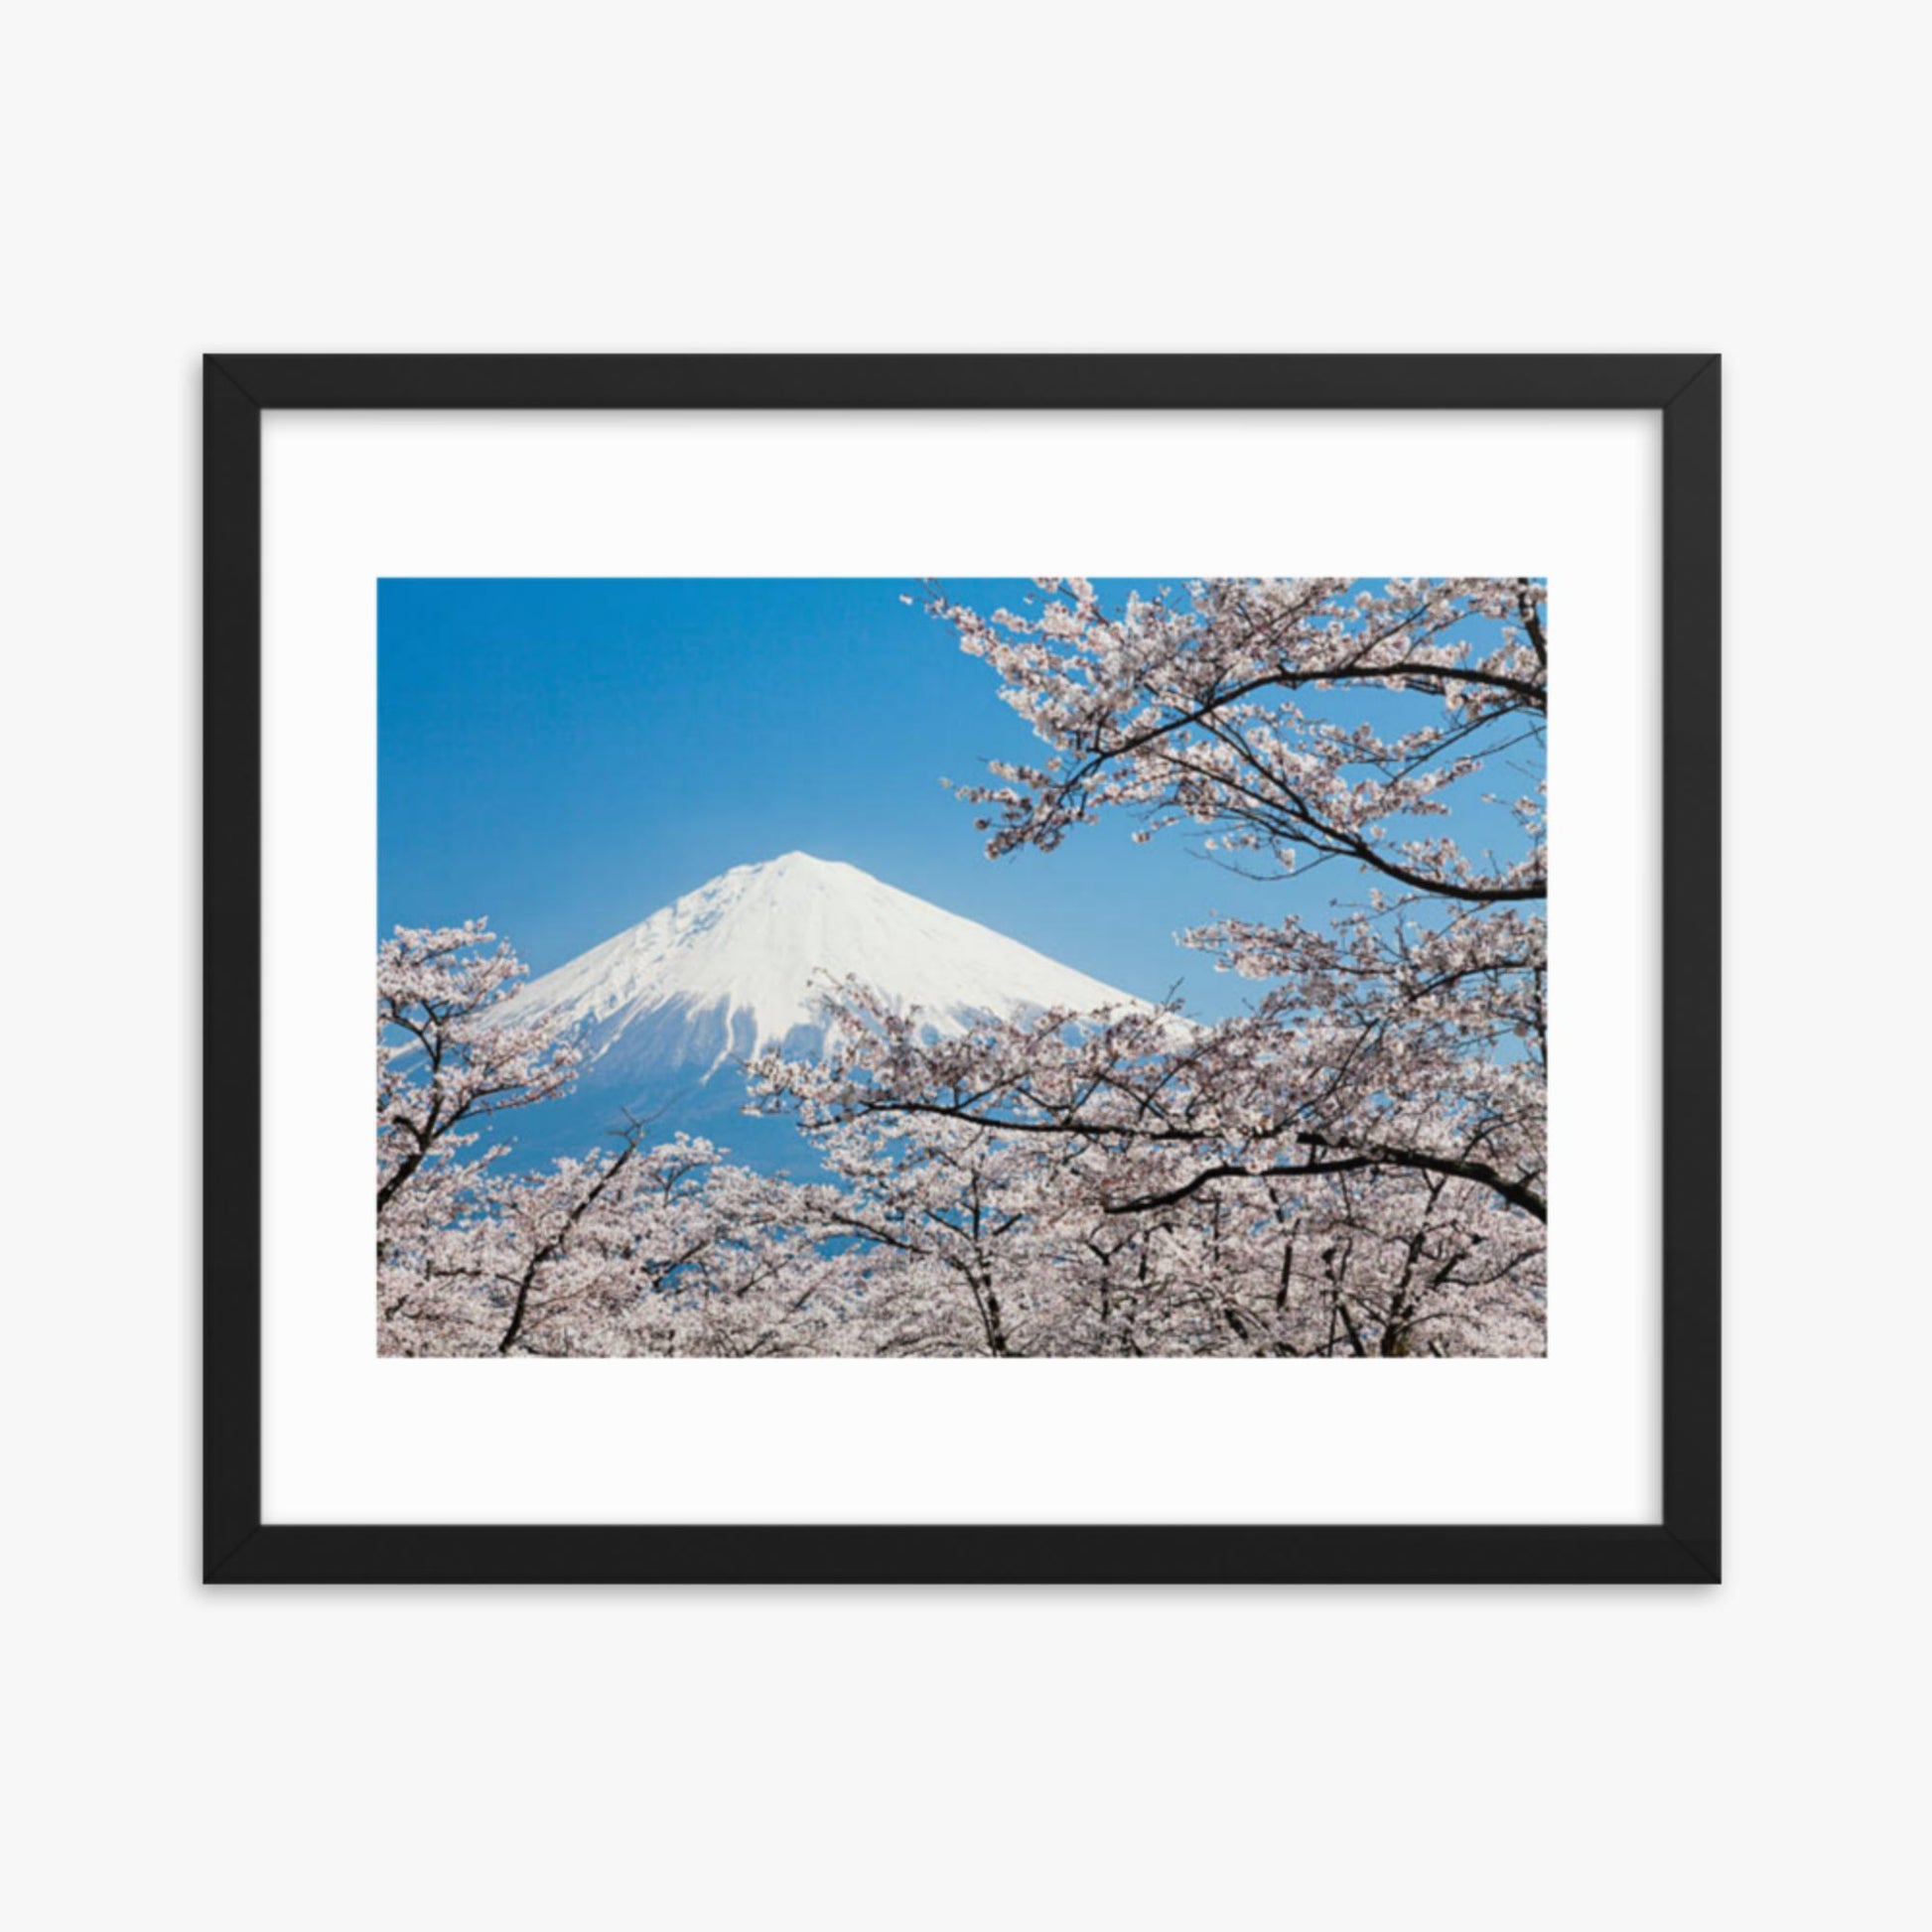 Mount Fuji & Cherry Blossoms 16x20 in Poster With Black Frame